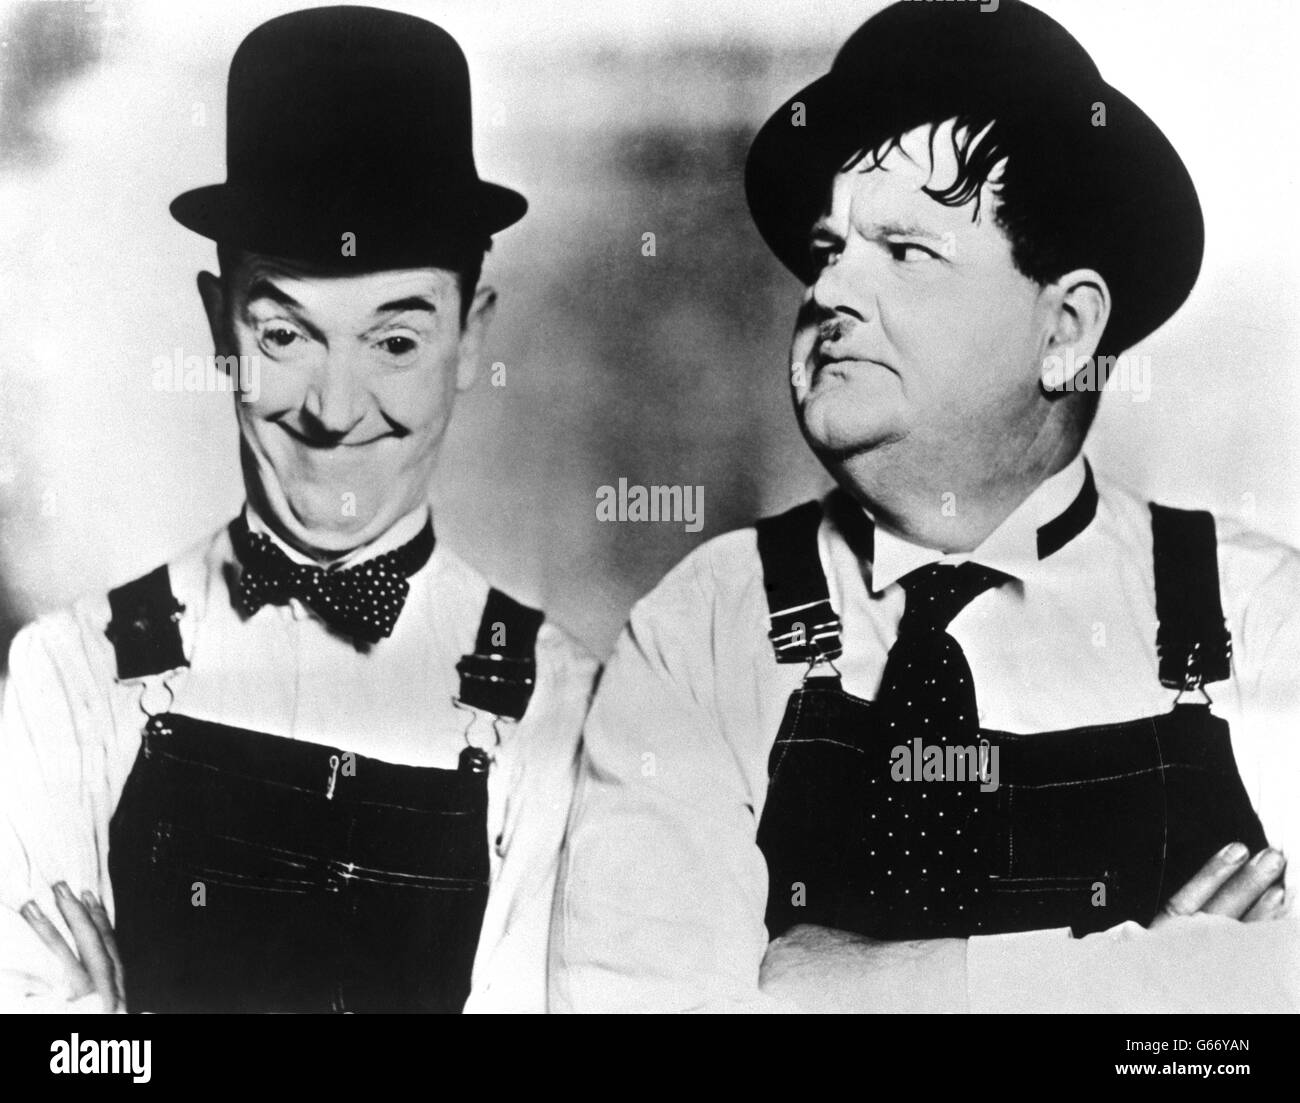 Film - When Comedy Was King - Laurel and Hardy. Comedy duo Stan Laurel and Oliver Hardy in the documentary film When Comedy Was King 1960. Stock Photo